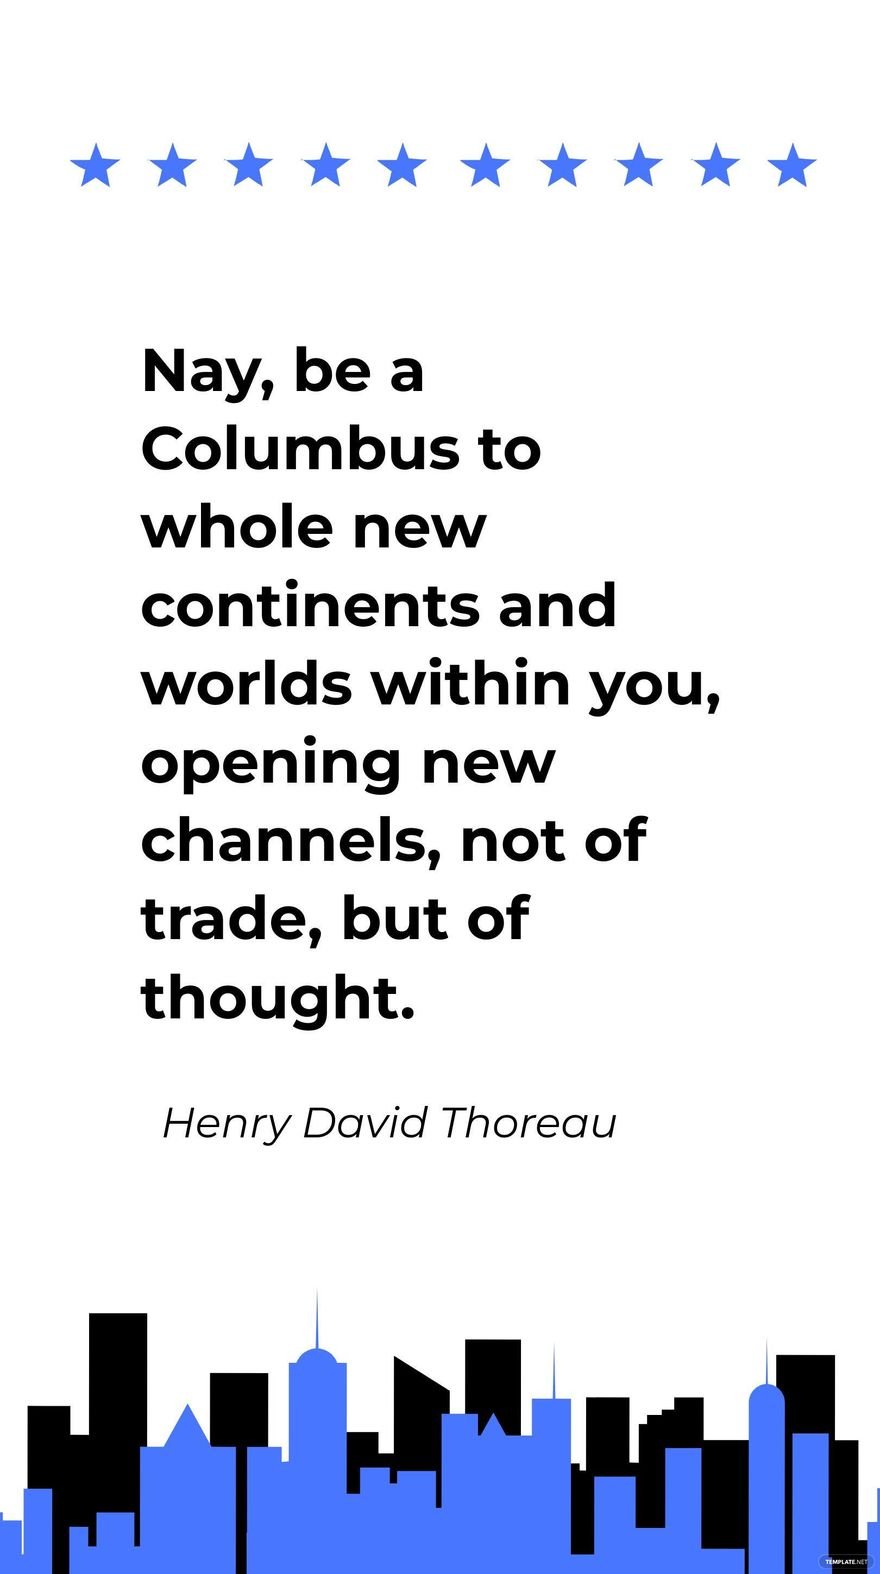 Henry David Thoreau- Nay, be a Columbus to whole new continents and worlds within you, opening new channels, not of trade, but of thought.